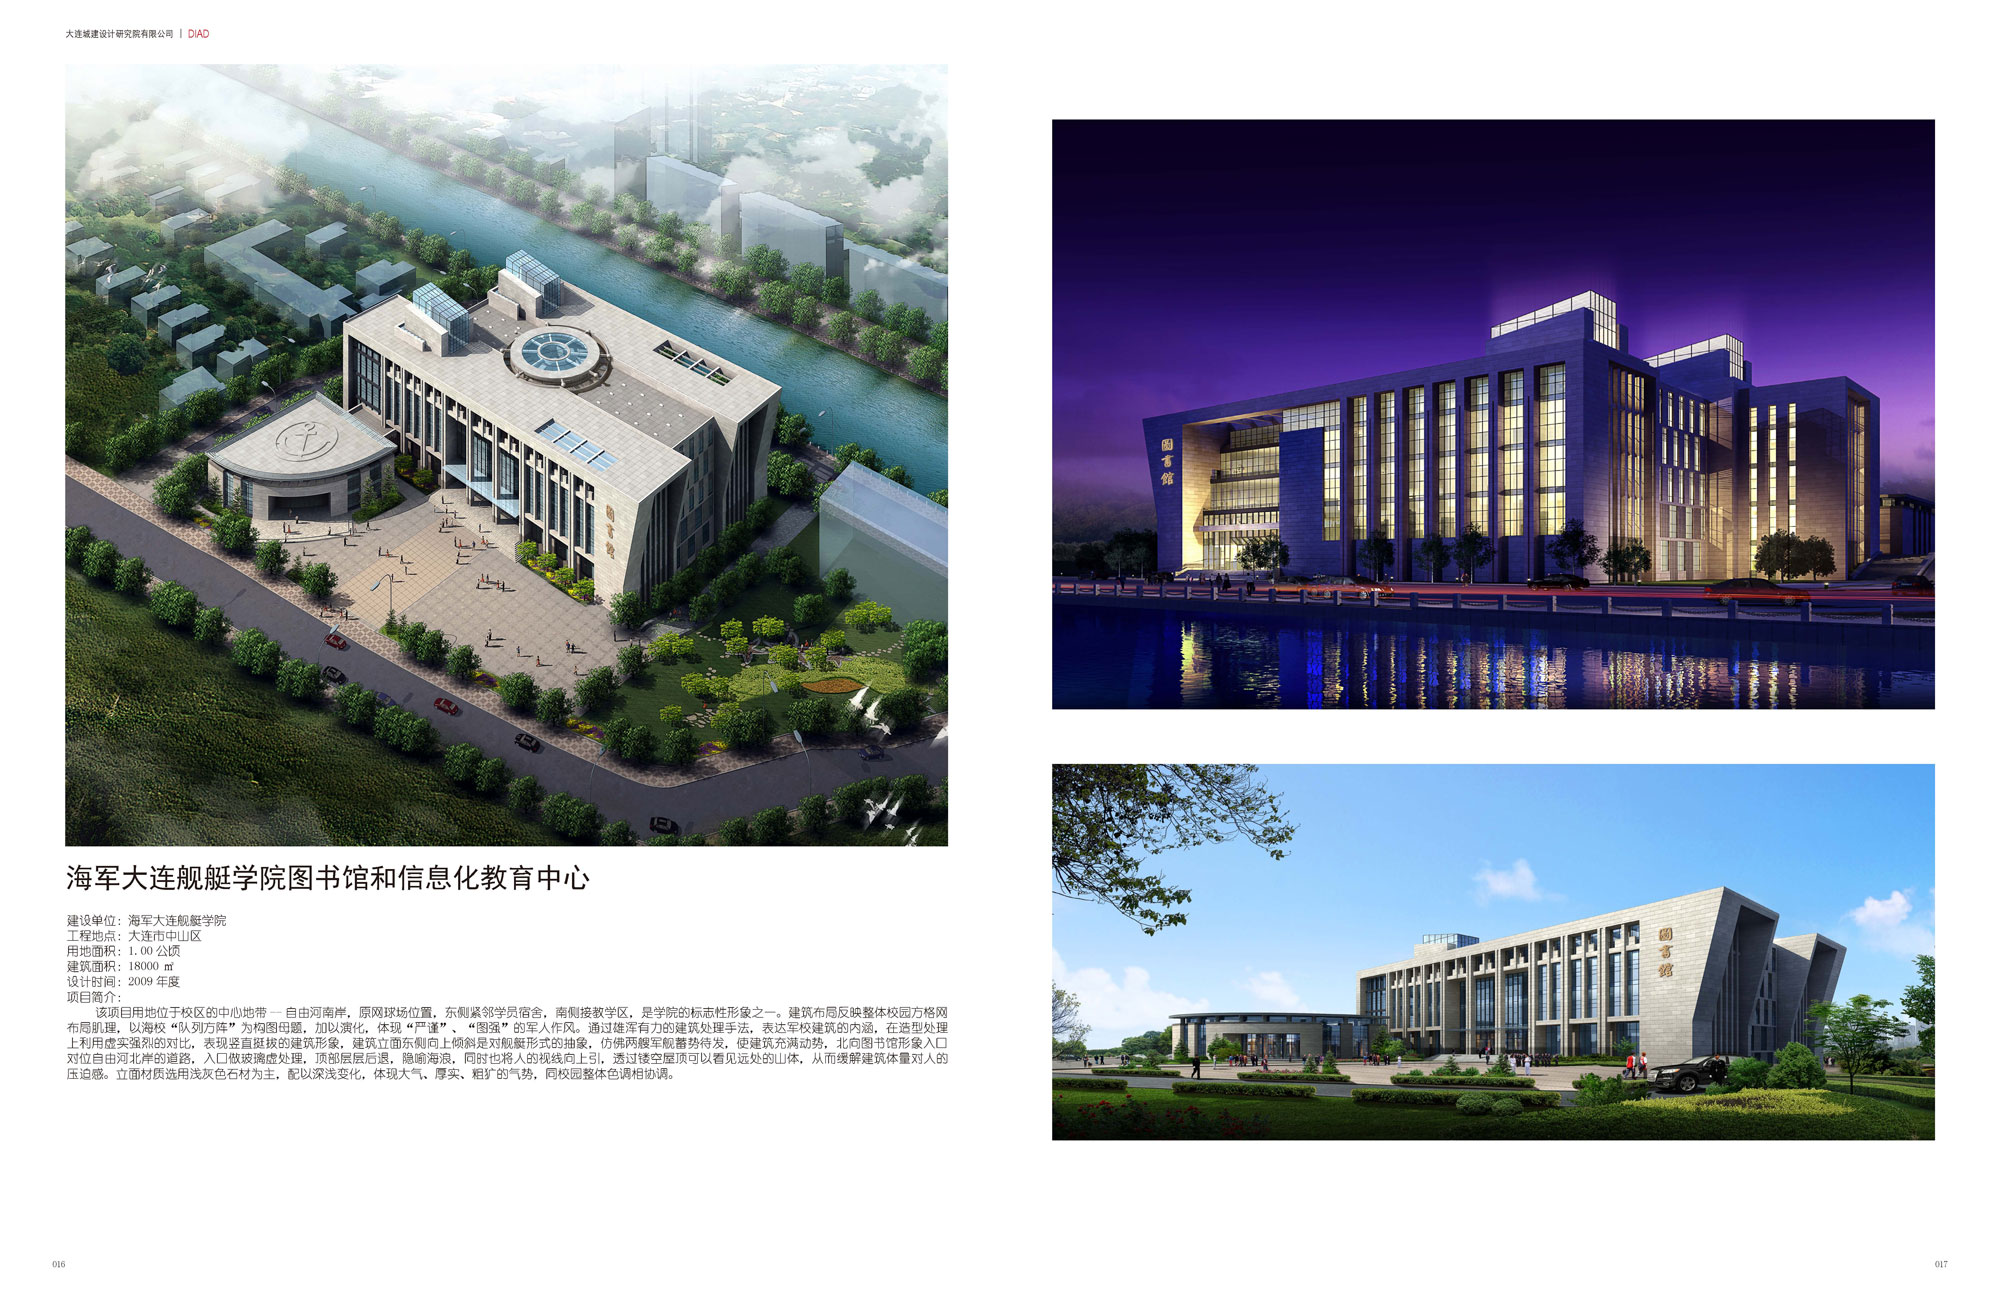 PLA Dalian Naval Academy Library and Information Education Center